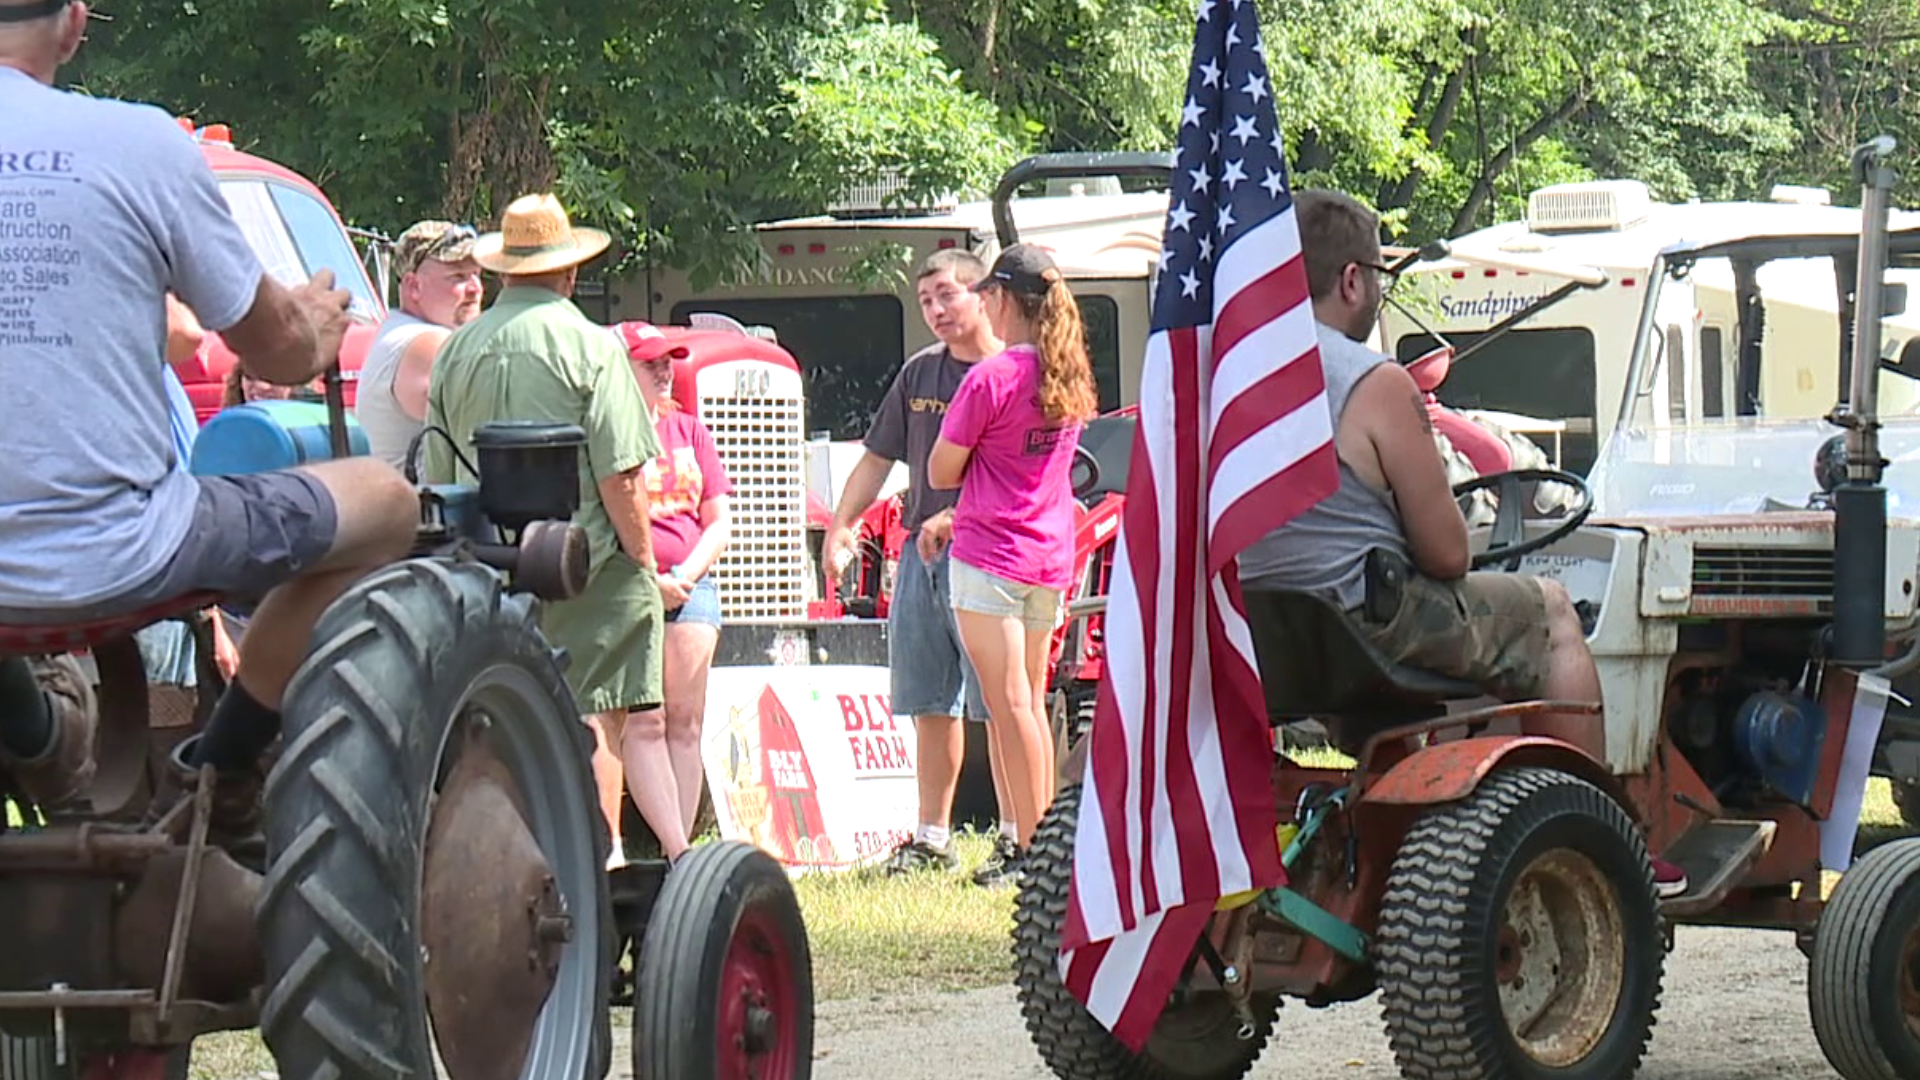 An antique machinery show is going on amid the pandemic. The event is encouraging social distancing, but many are not following guidelines issued by the state.